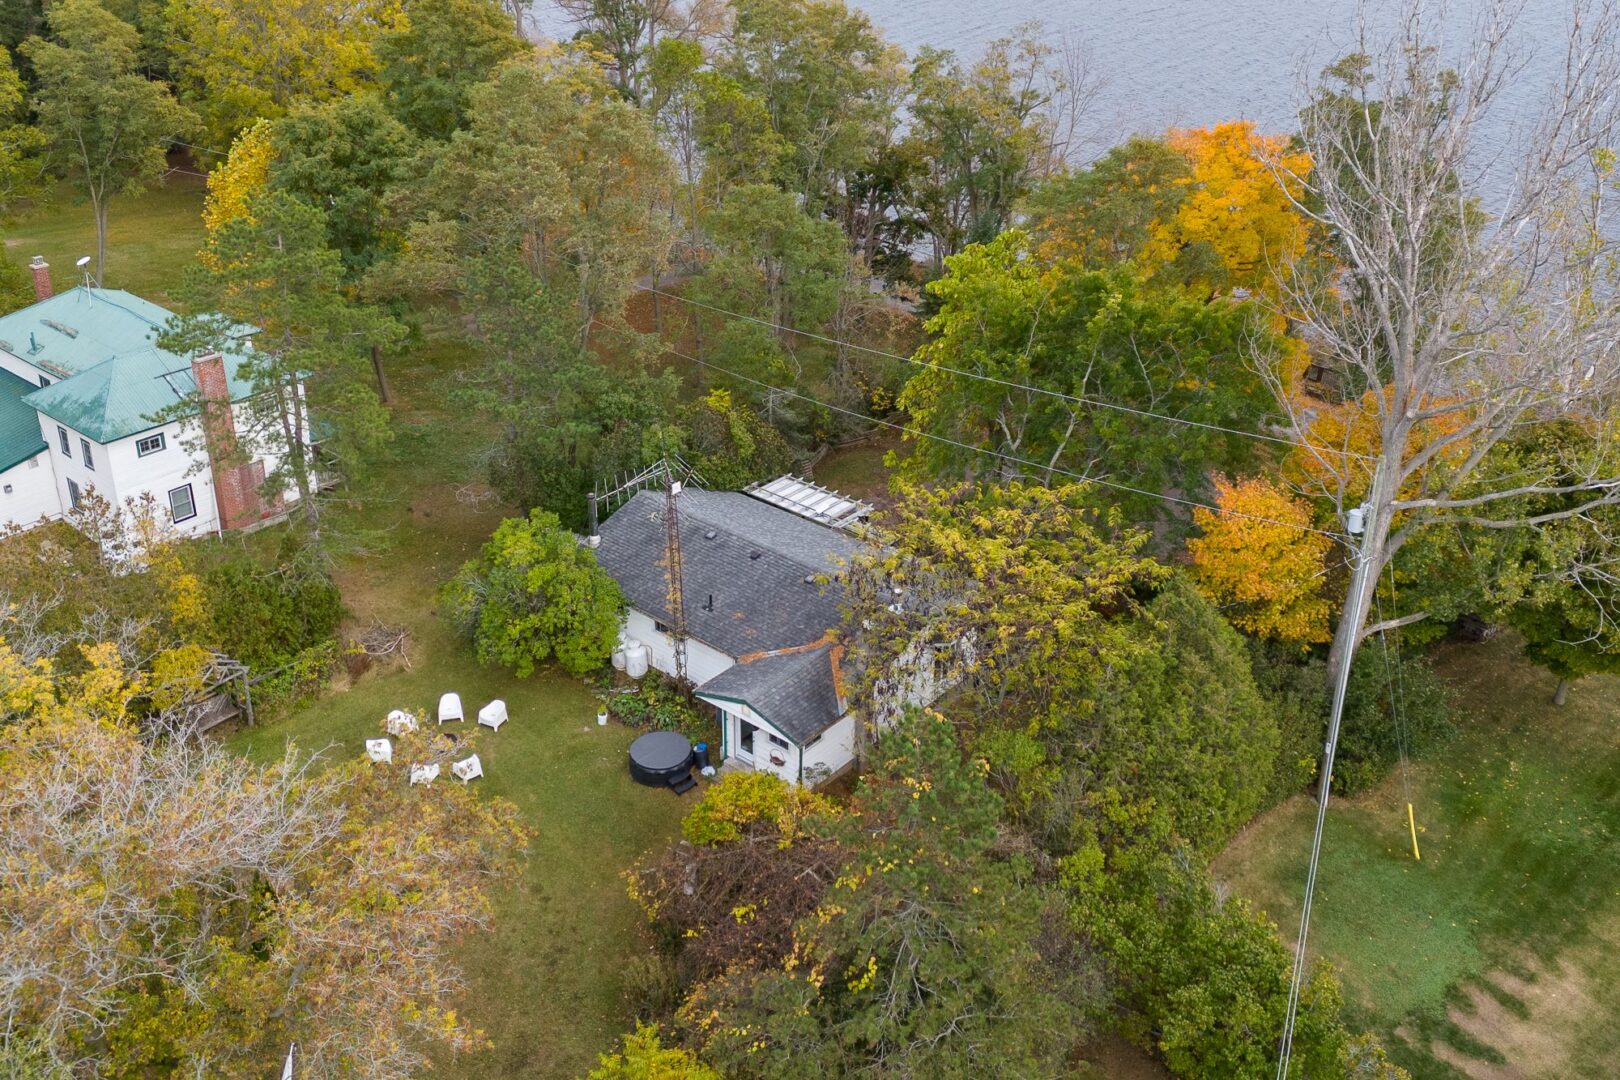 Overhead view of a lakefront bungalow surrounded by trees.